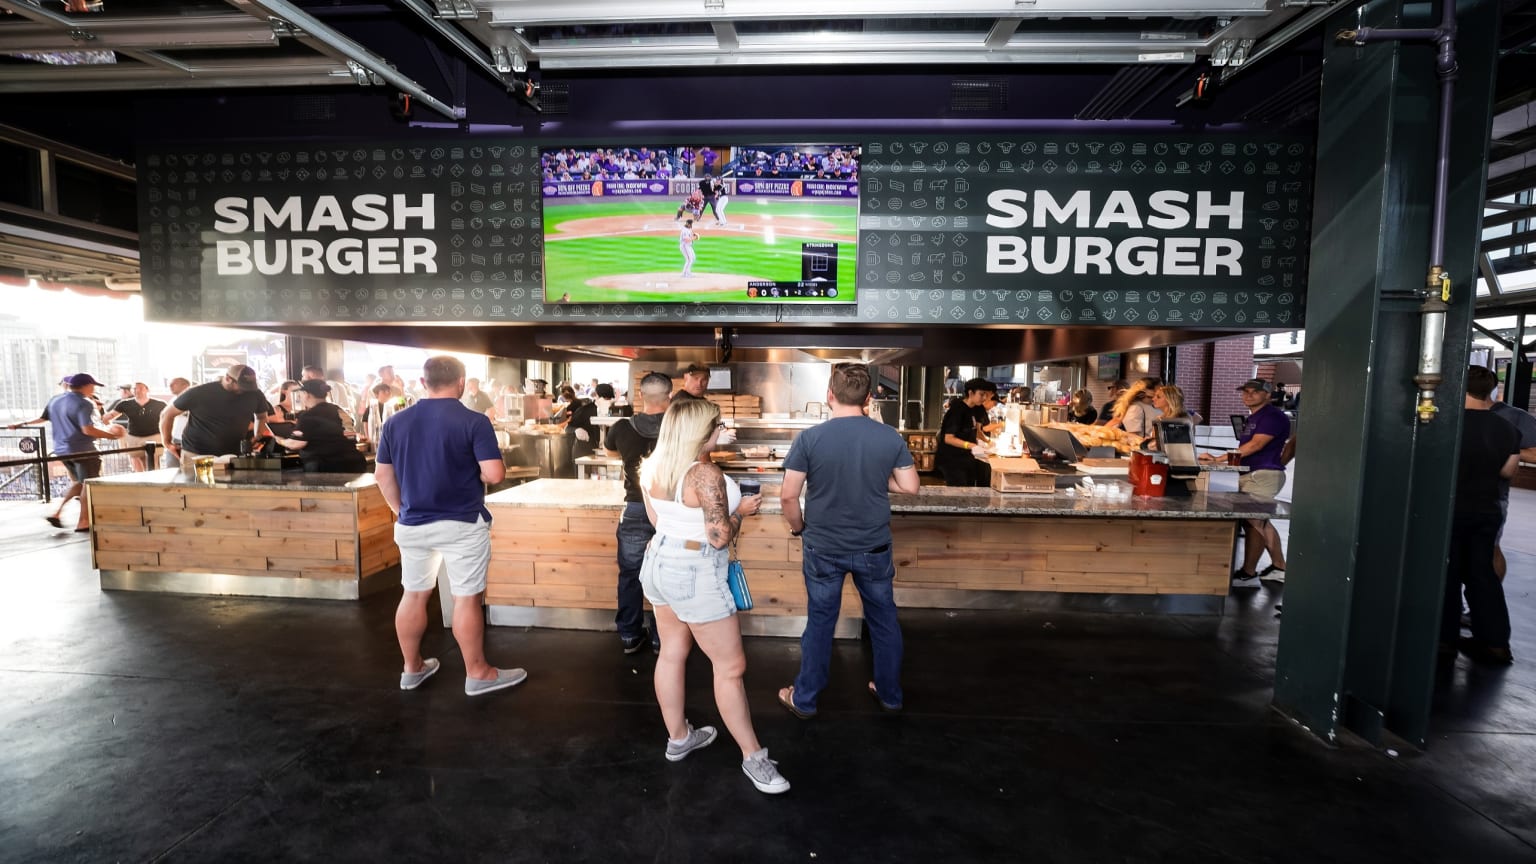 Top Spots To Eat And Drink In Coors Field - CBS Colorado